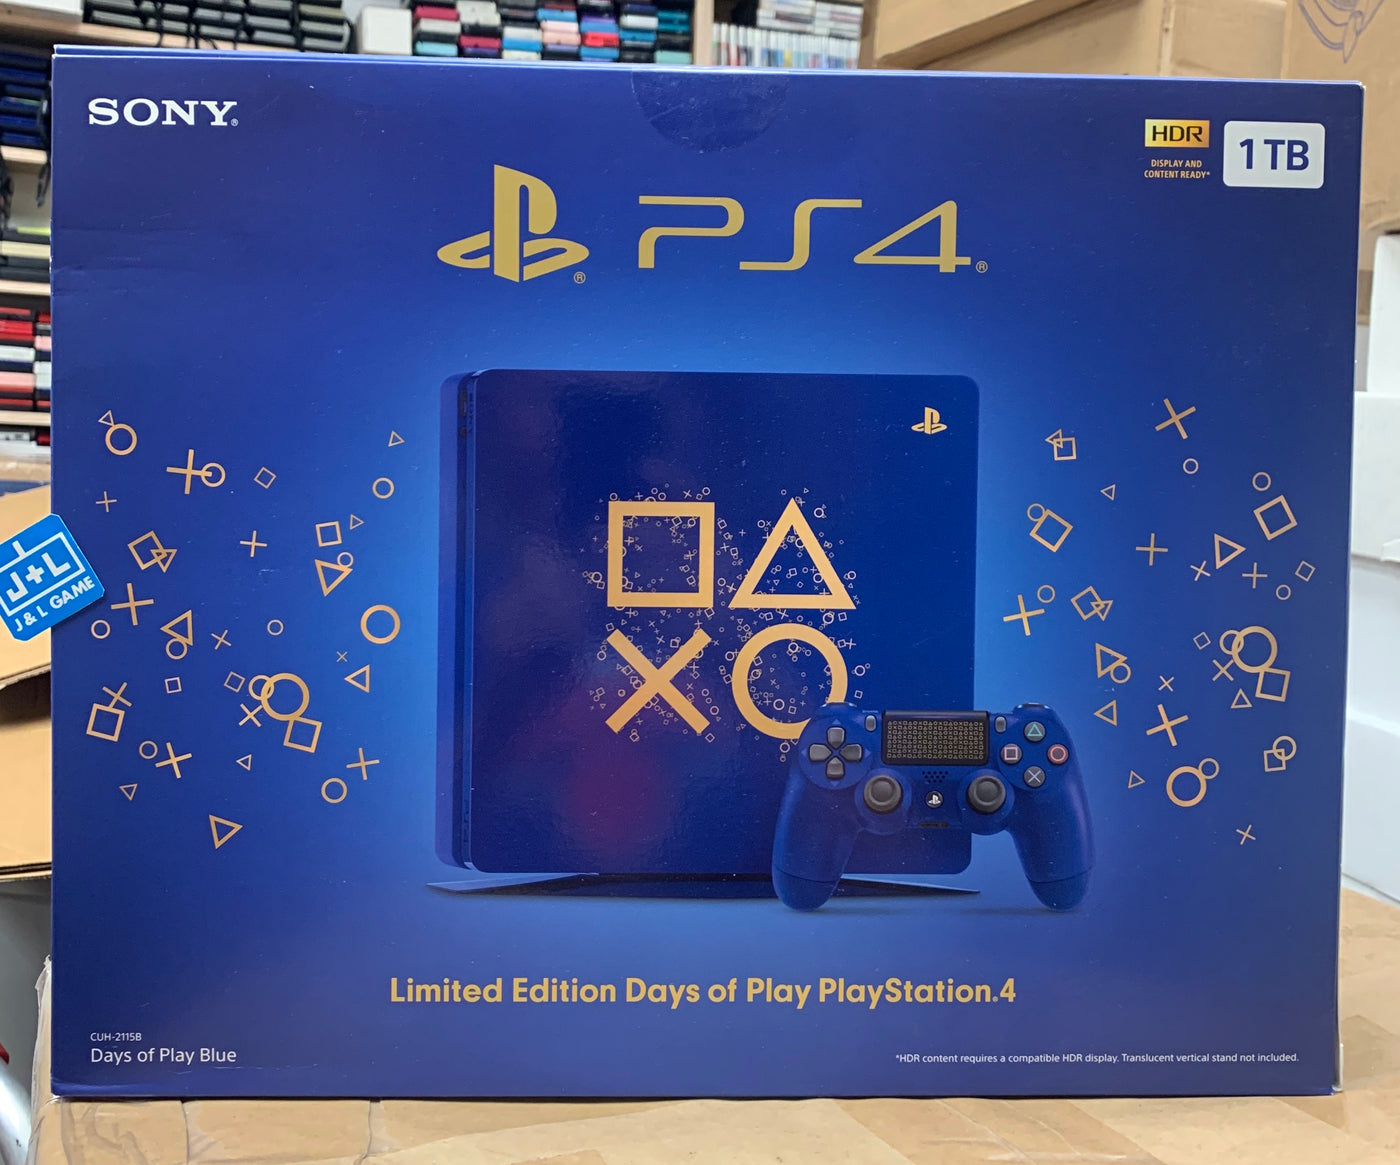 Sony PlayStation 5 PS5 Console Disc Edition Slim 1TB Brand New Free  Shipping